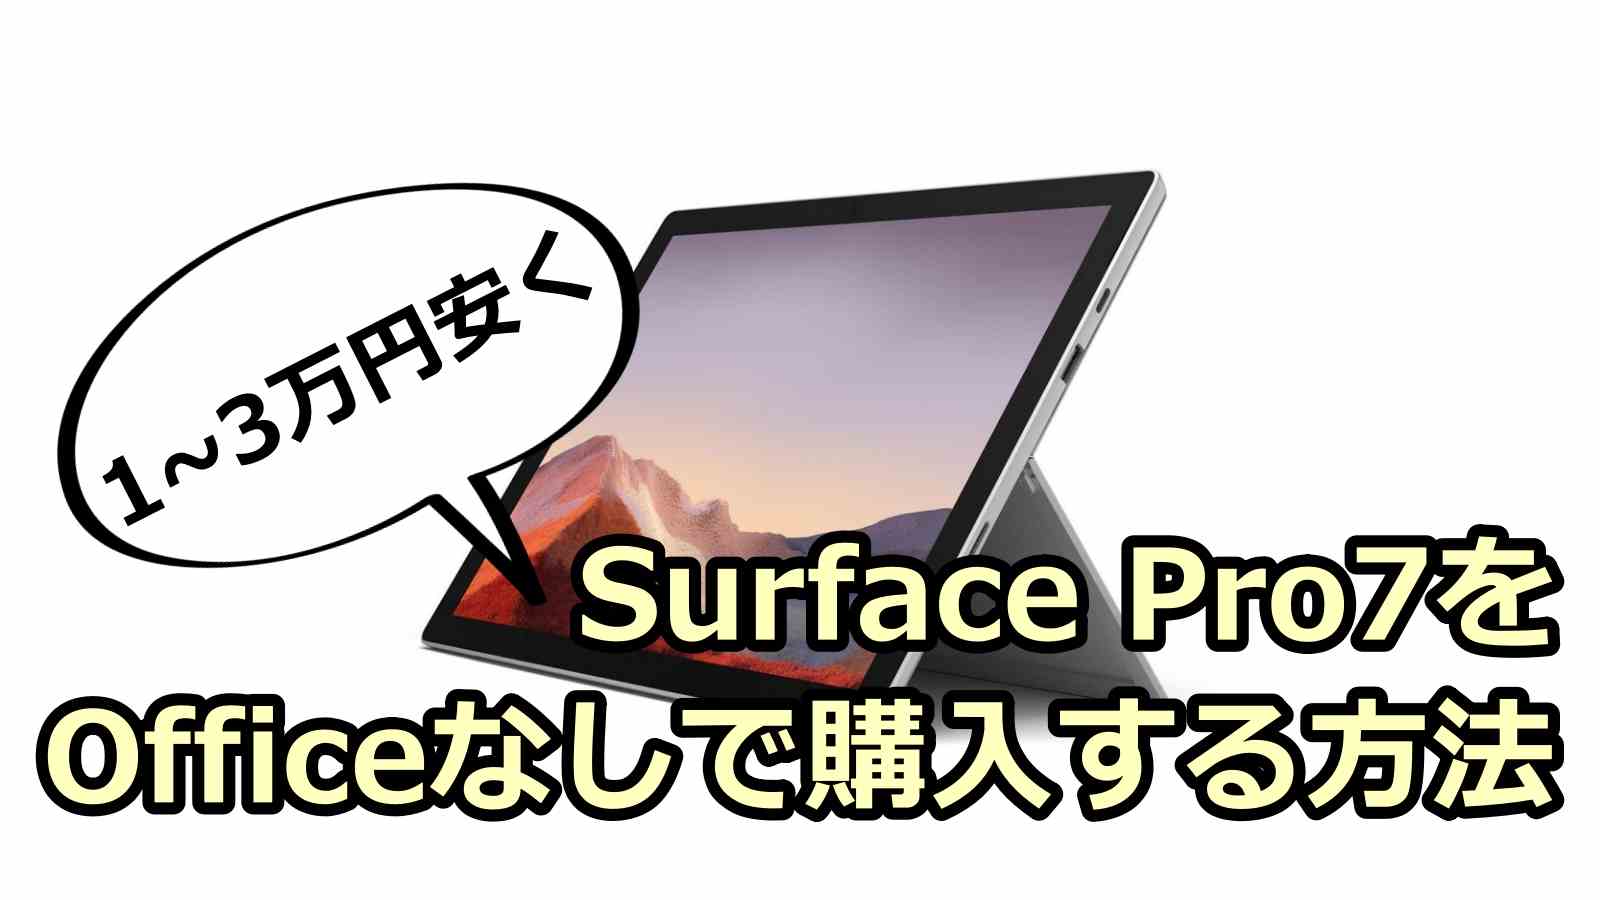 Surface pro 7 Officeなし